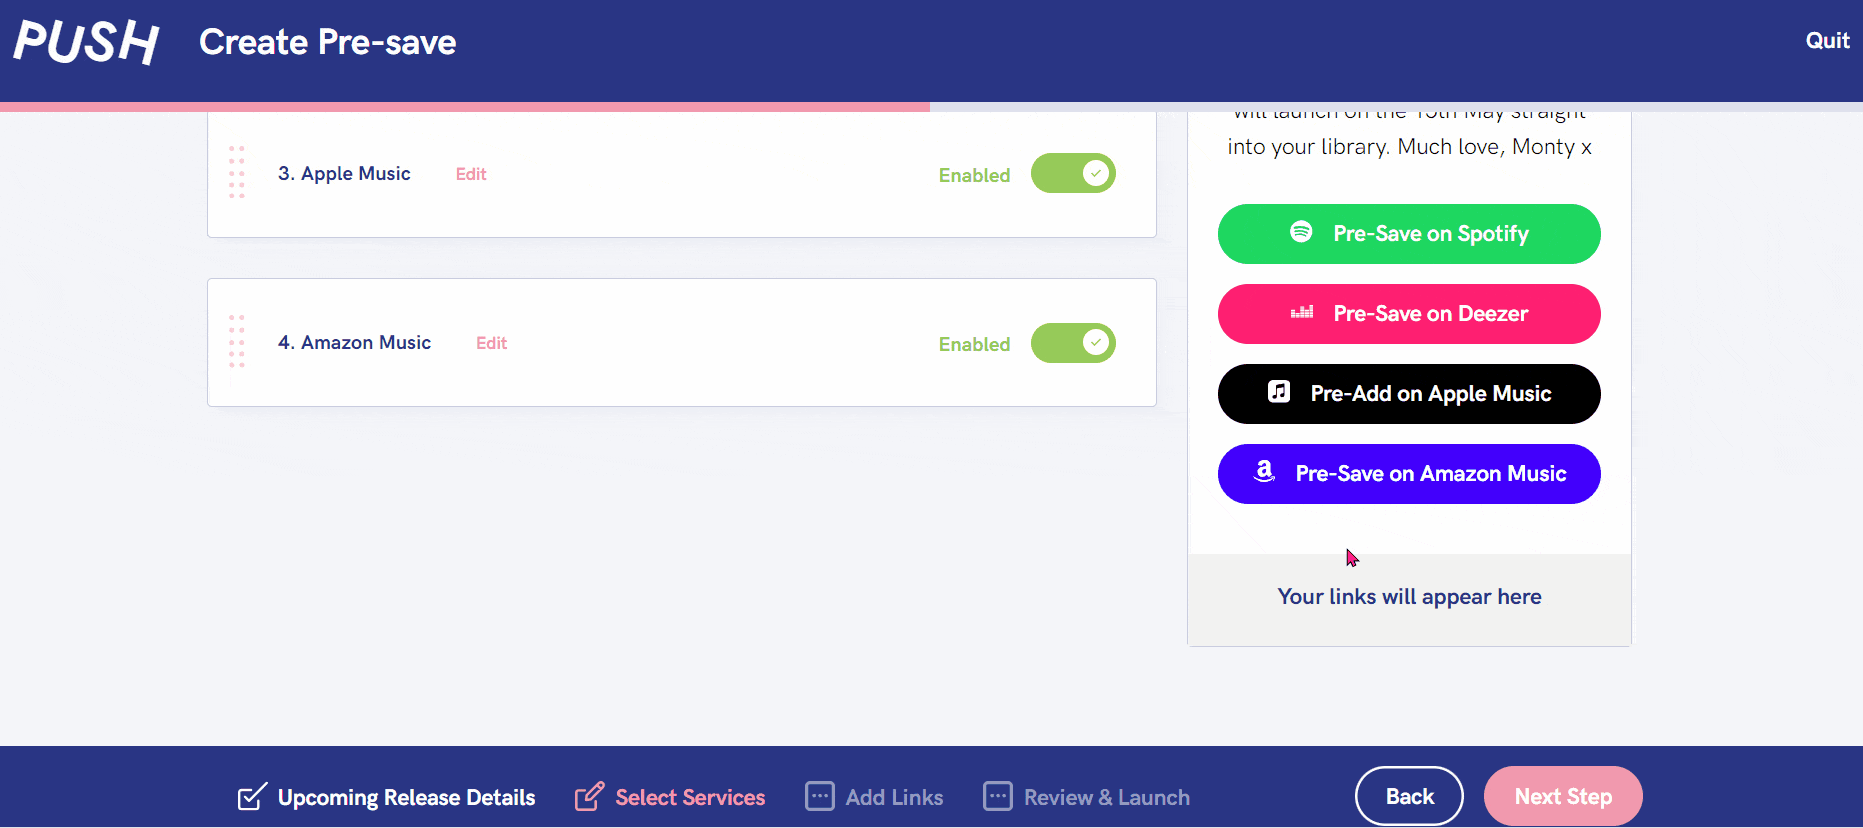 How to make a quick Pre-save to promote your music. 

GIF showing the creation process